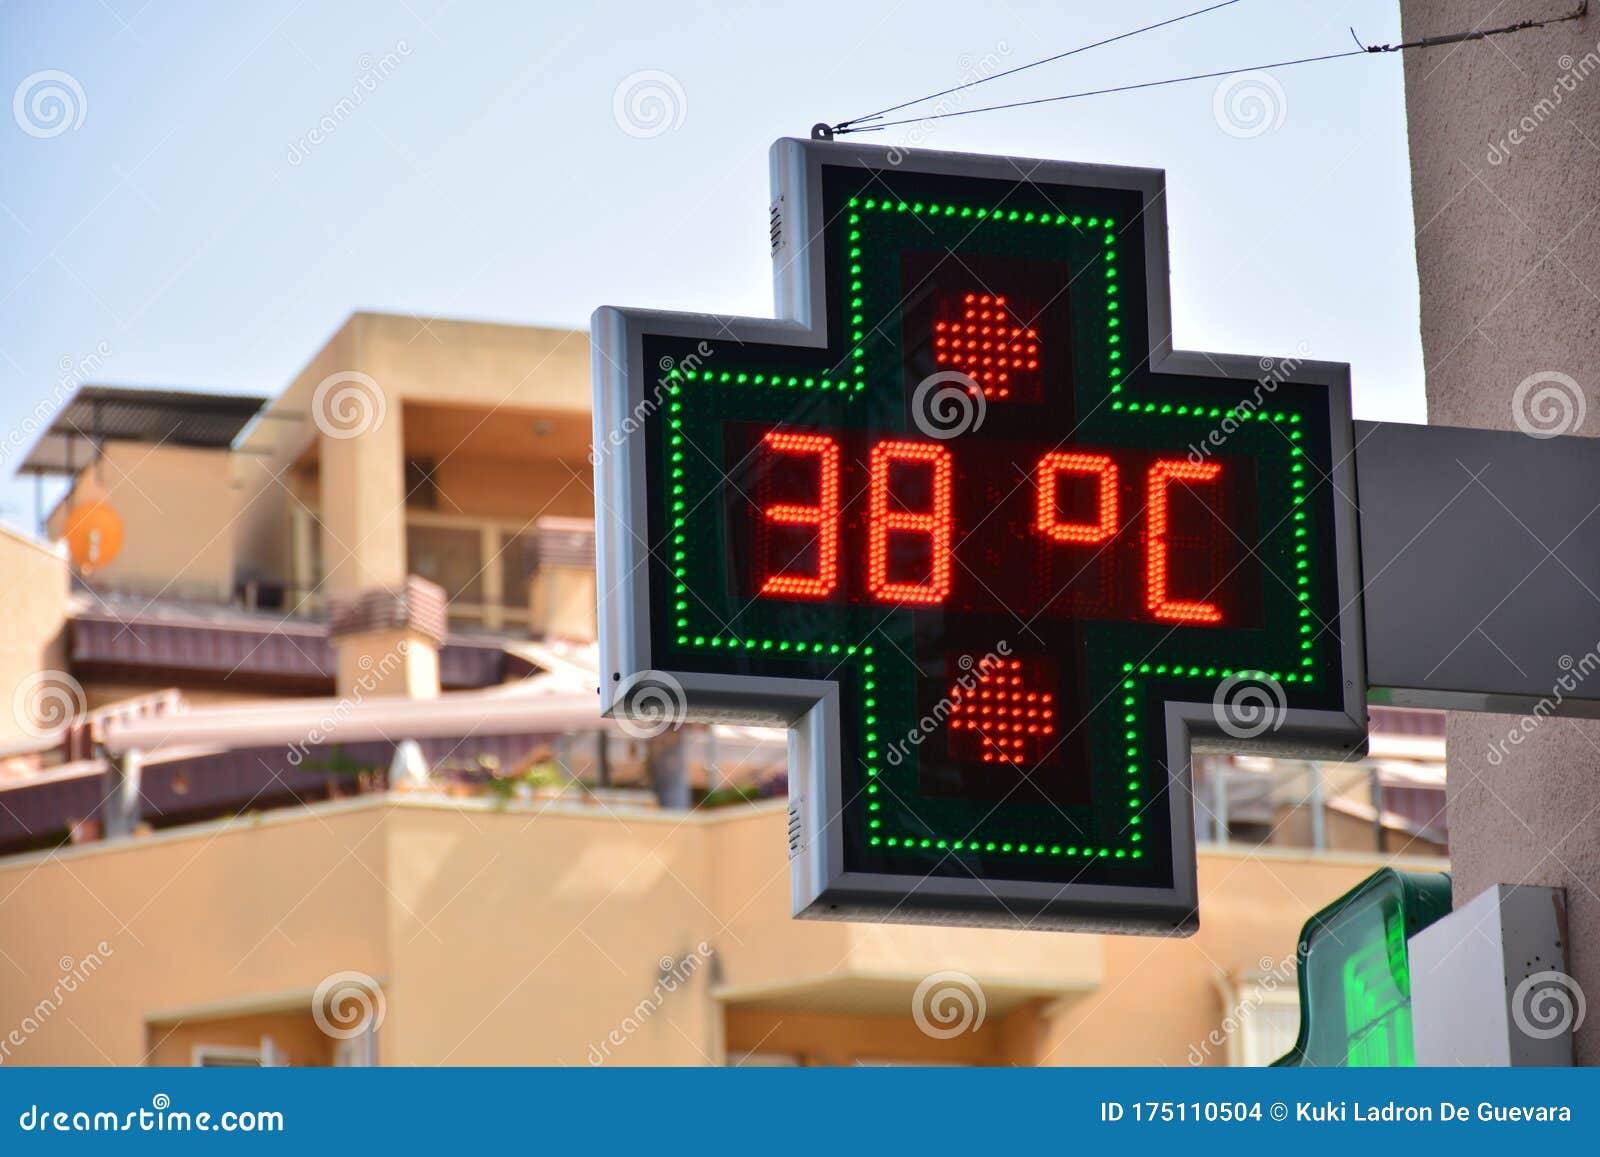 street thermometer of a pharmacy at 38 degrees celsius